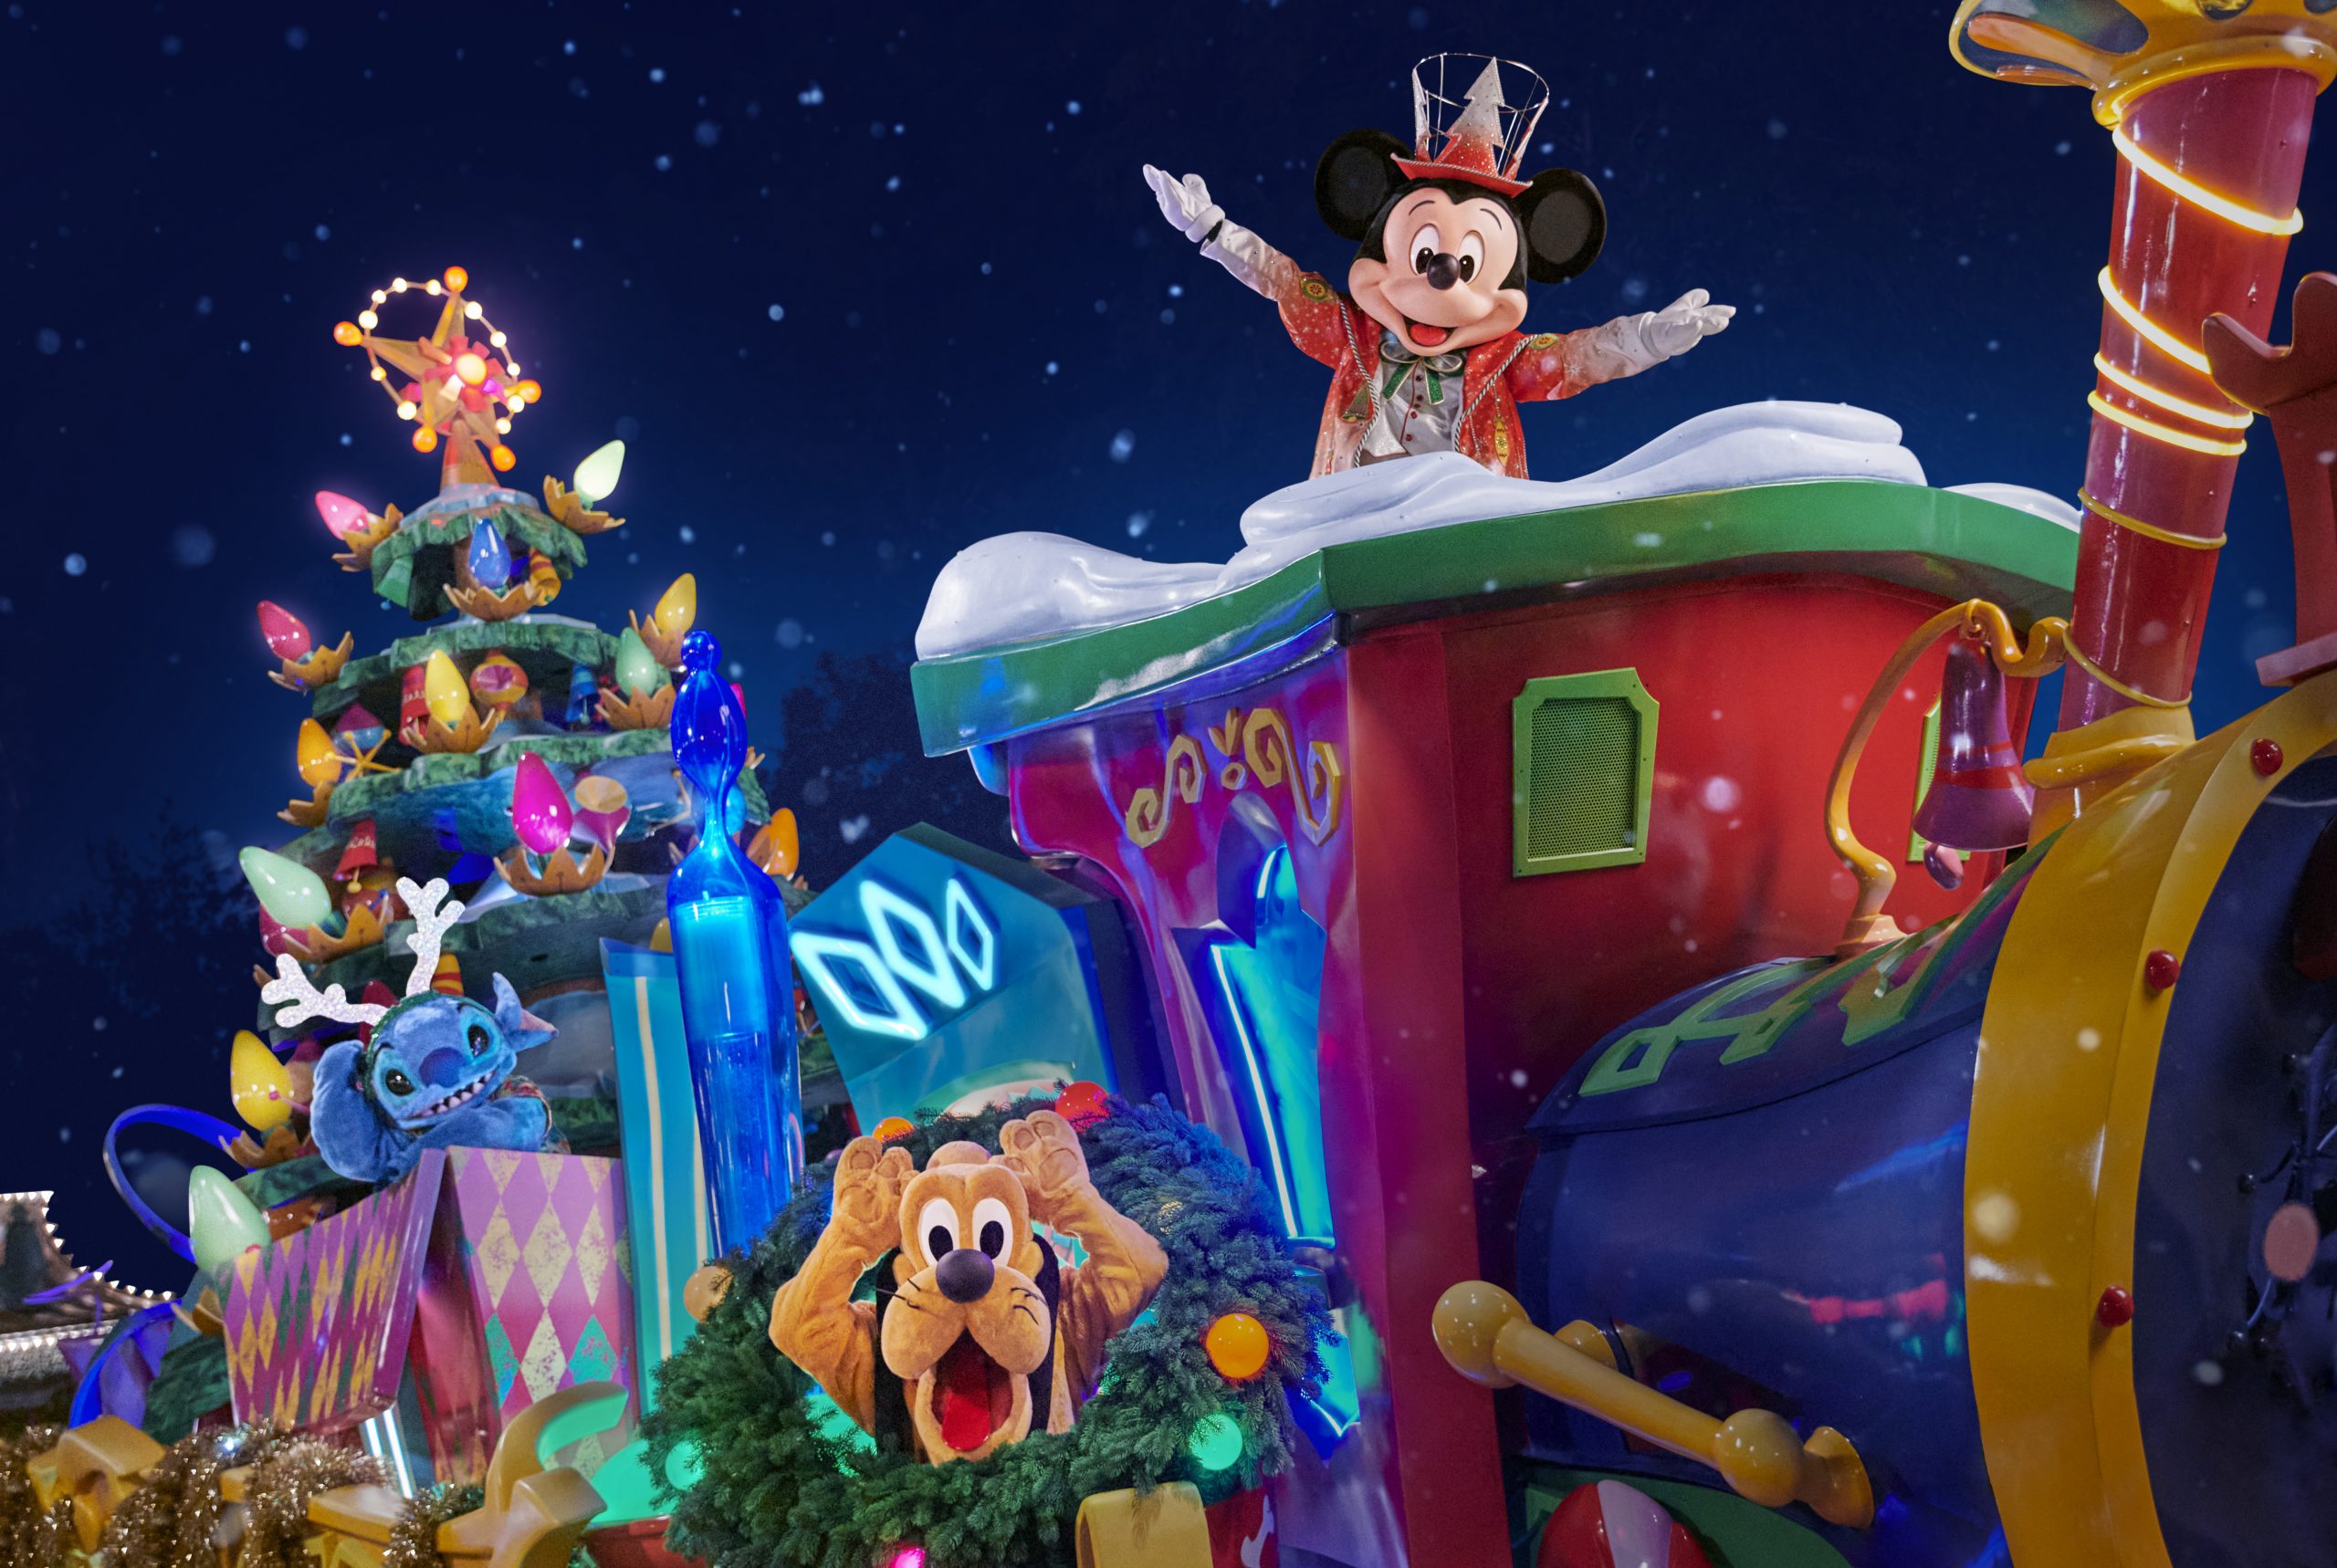 Disney Enchanted Christmas will Shine Even Brighter from November 12th, 2022 to January 8th, 2023 at Disneyland® Paris